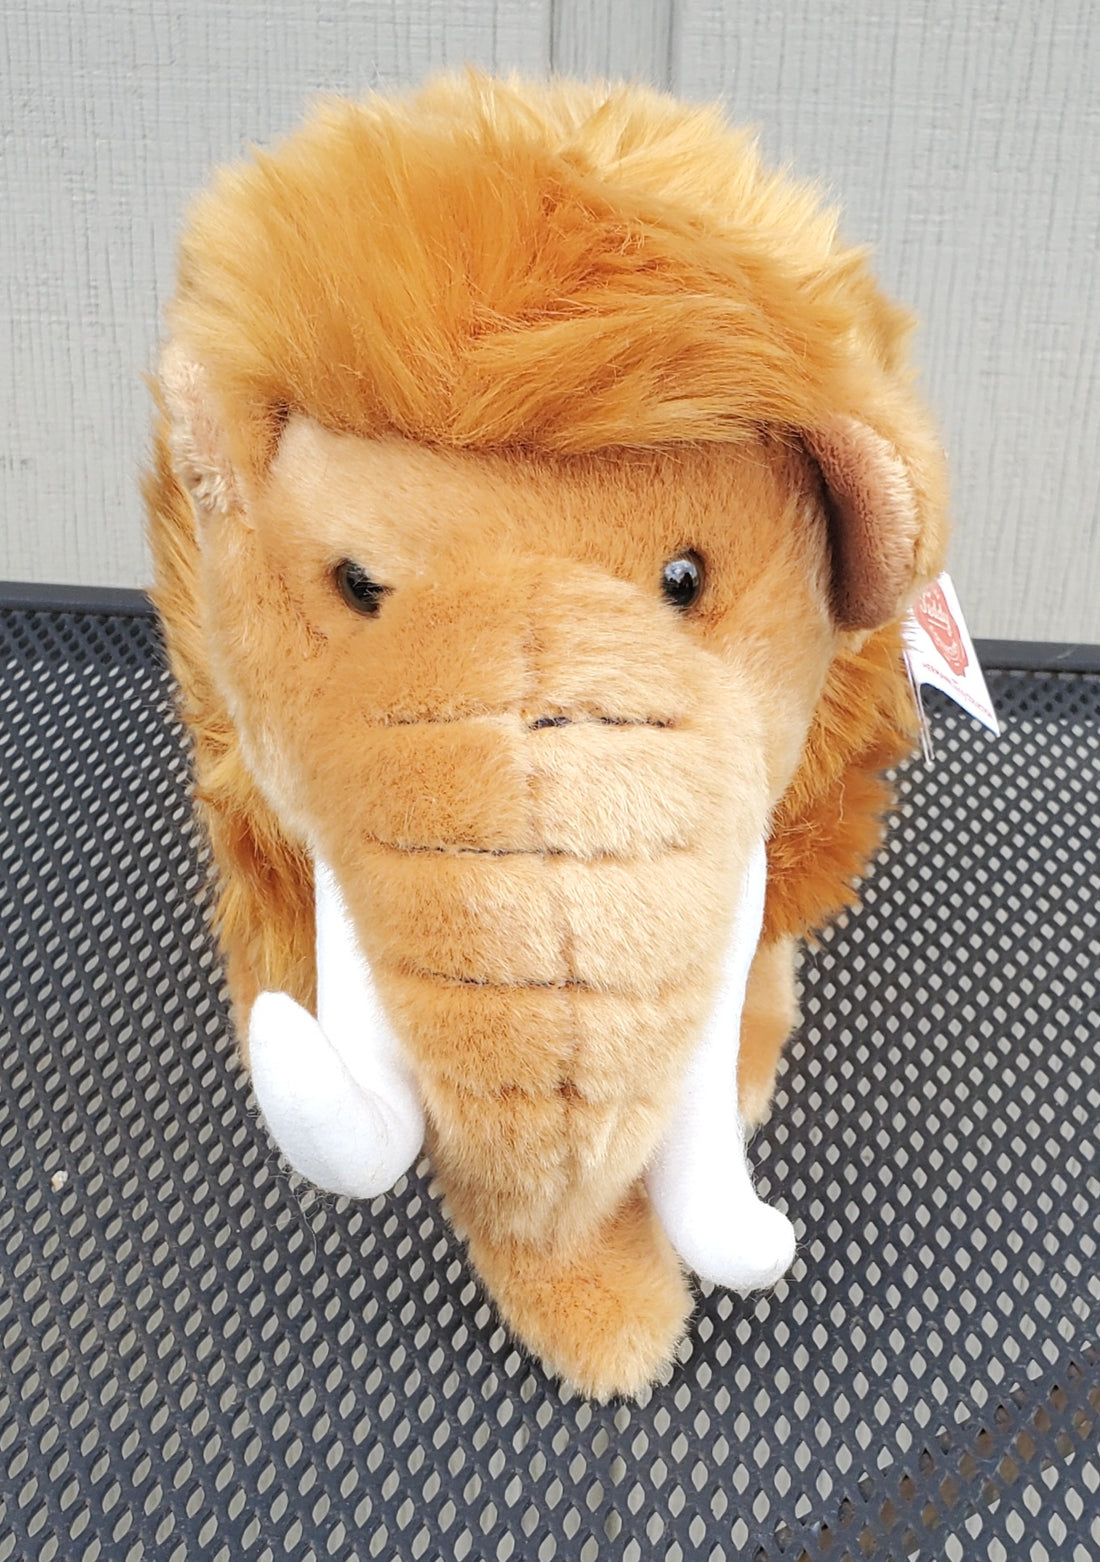 Woolly Mammoth - 12" Baby-Safe Plush from Teddy Hermann